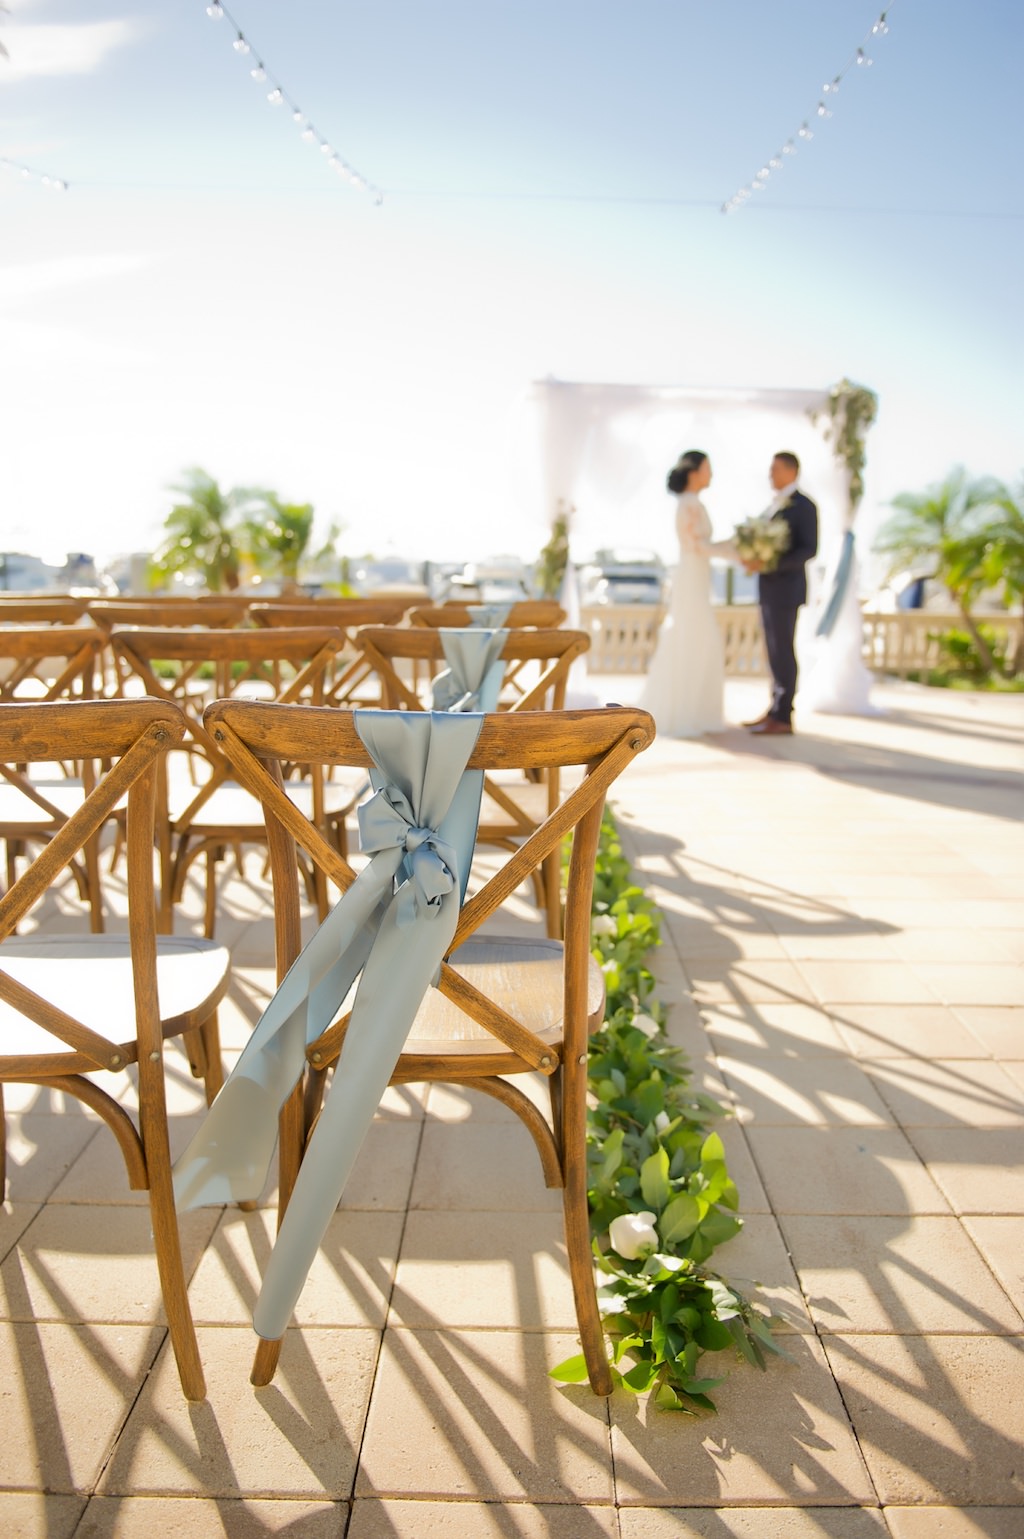 Outdoor Waterfront French Countryside Inspired Wedding Ceremony with Wooden Cross Back Chairs with Wide Light Blue Ribbon, Greenery Garland Aisle, and White Draped Ceremony Arch | Tampa Bay Wedding Planner Kelly Kennedy Weddings and Events | Tampa Waterfront Outdoor Wedding Venue Westshore Yacht Club